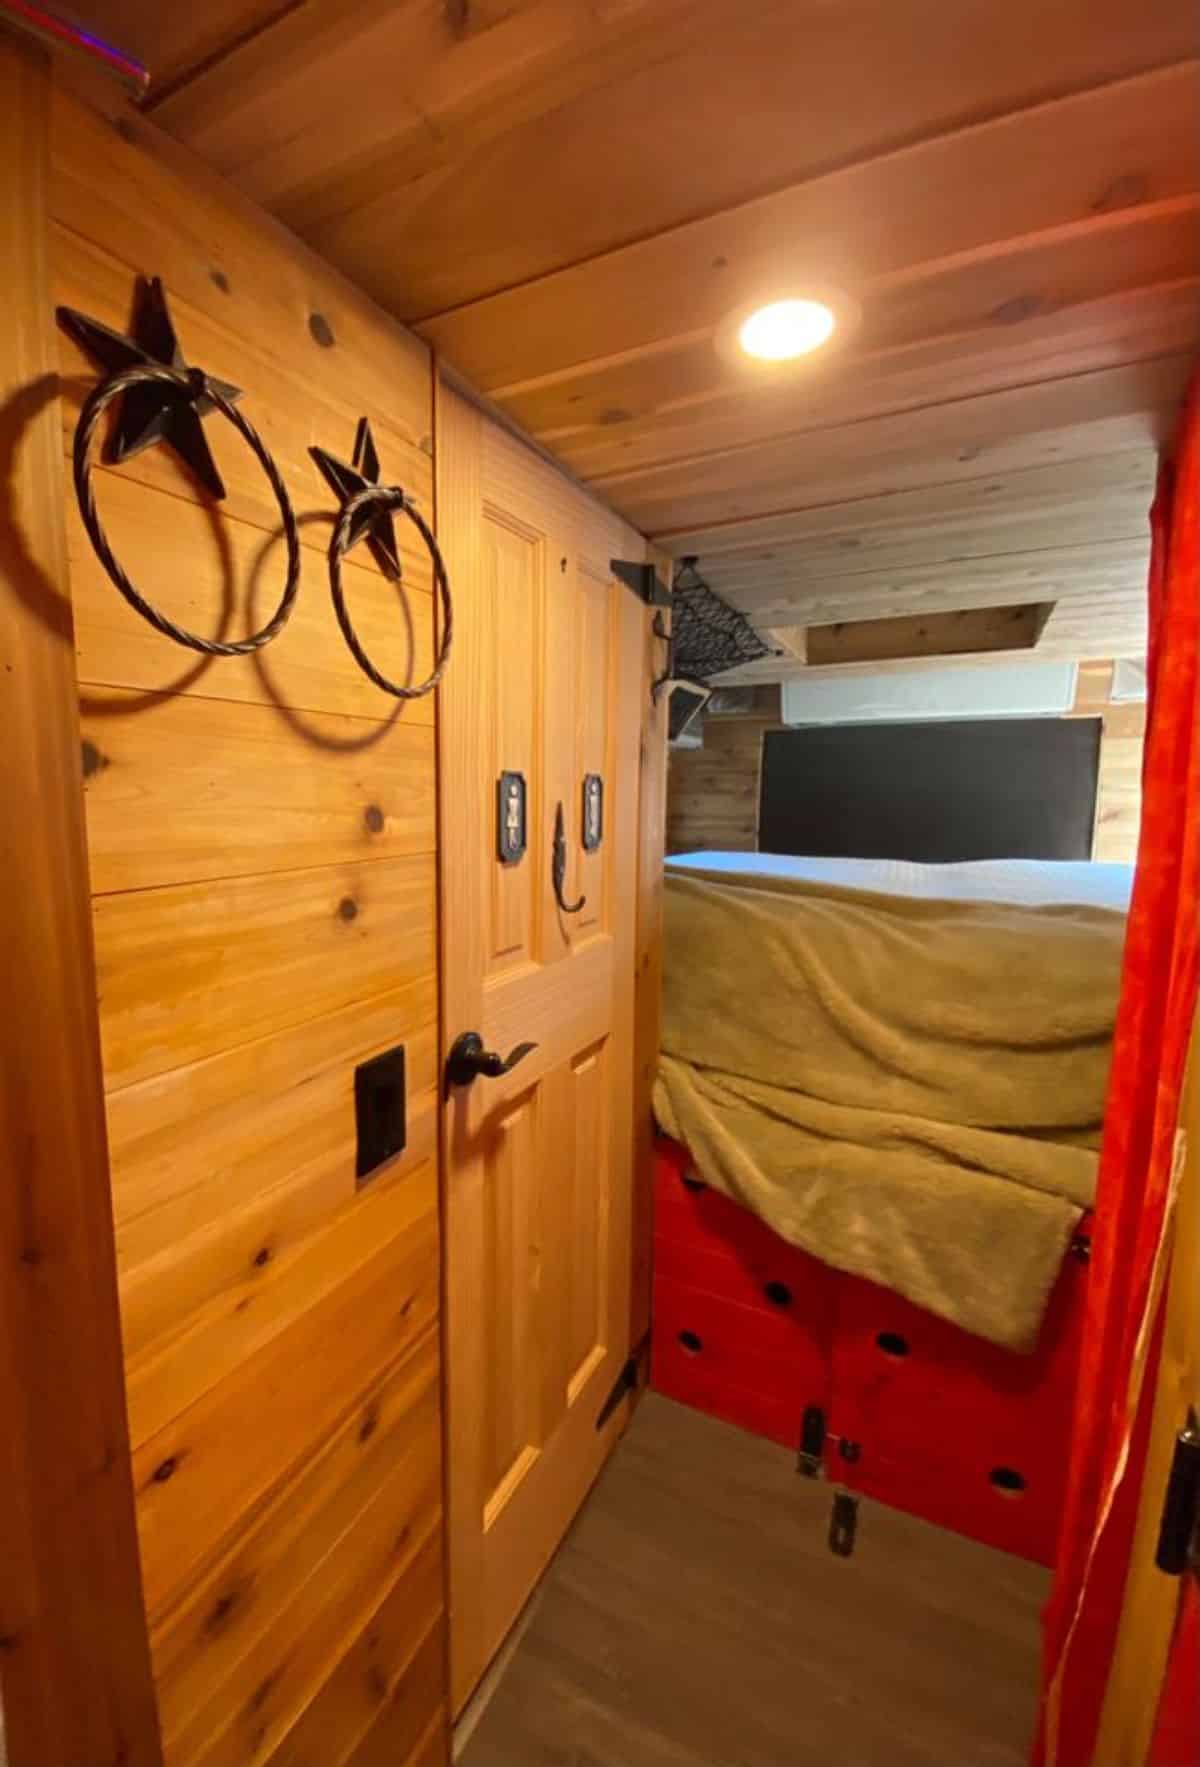 huge comfortable bedroom on the end of converted tiny home